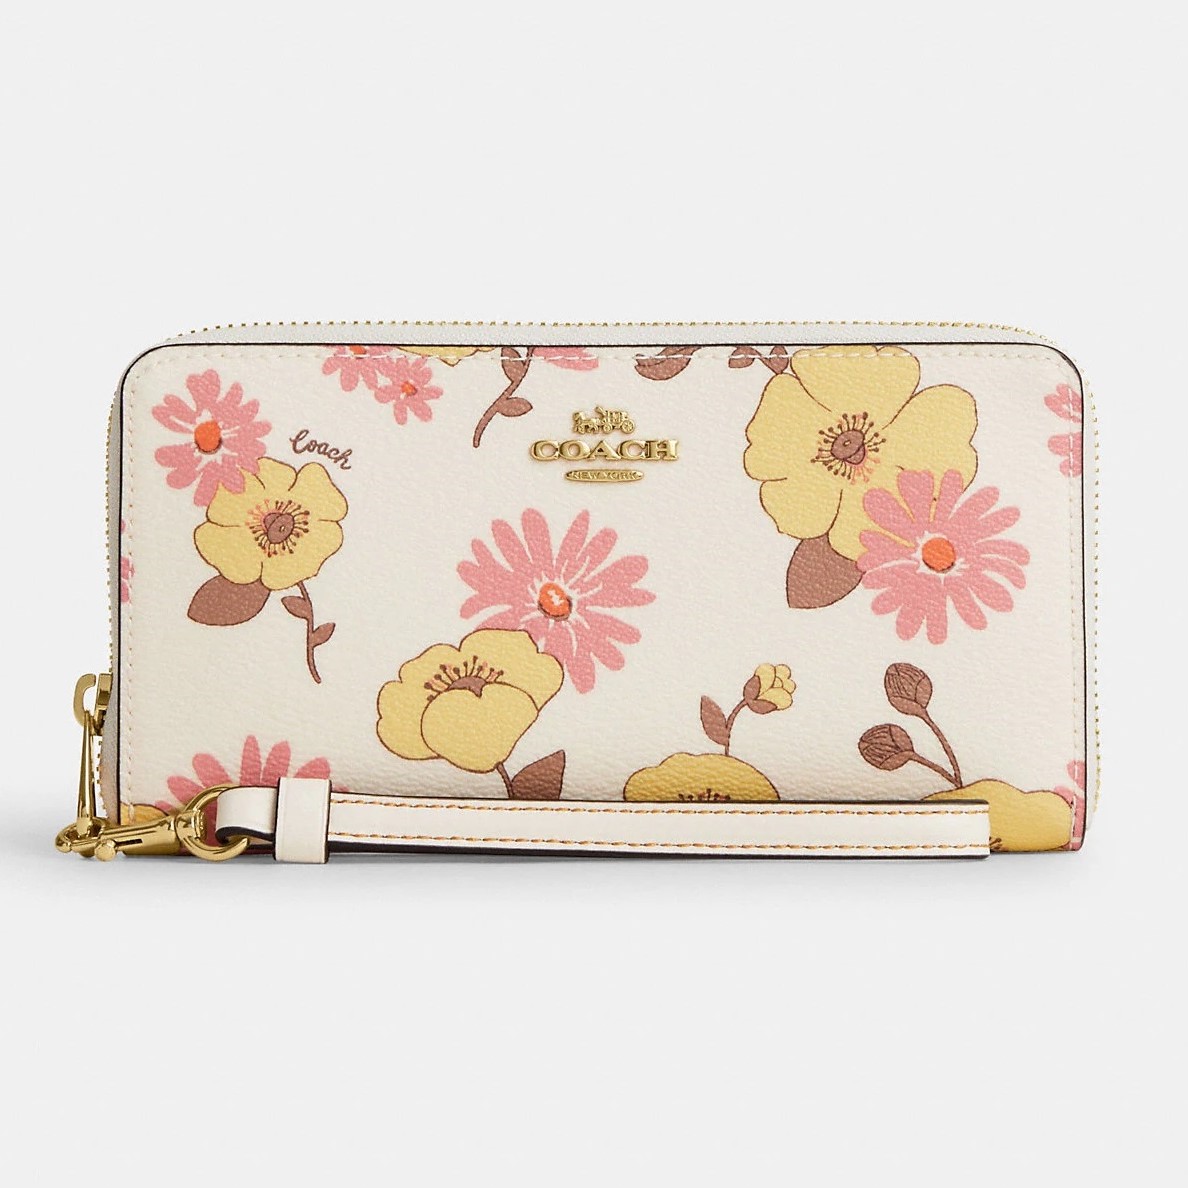 VÍ DÀI HOA COACH LONG ZIP AROUND WALLET WITH FLORAL CLUSTER PRINT CI798 3